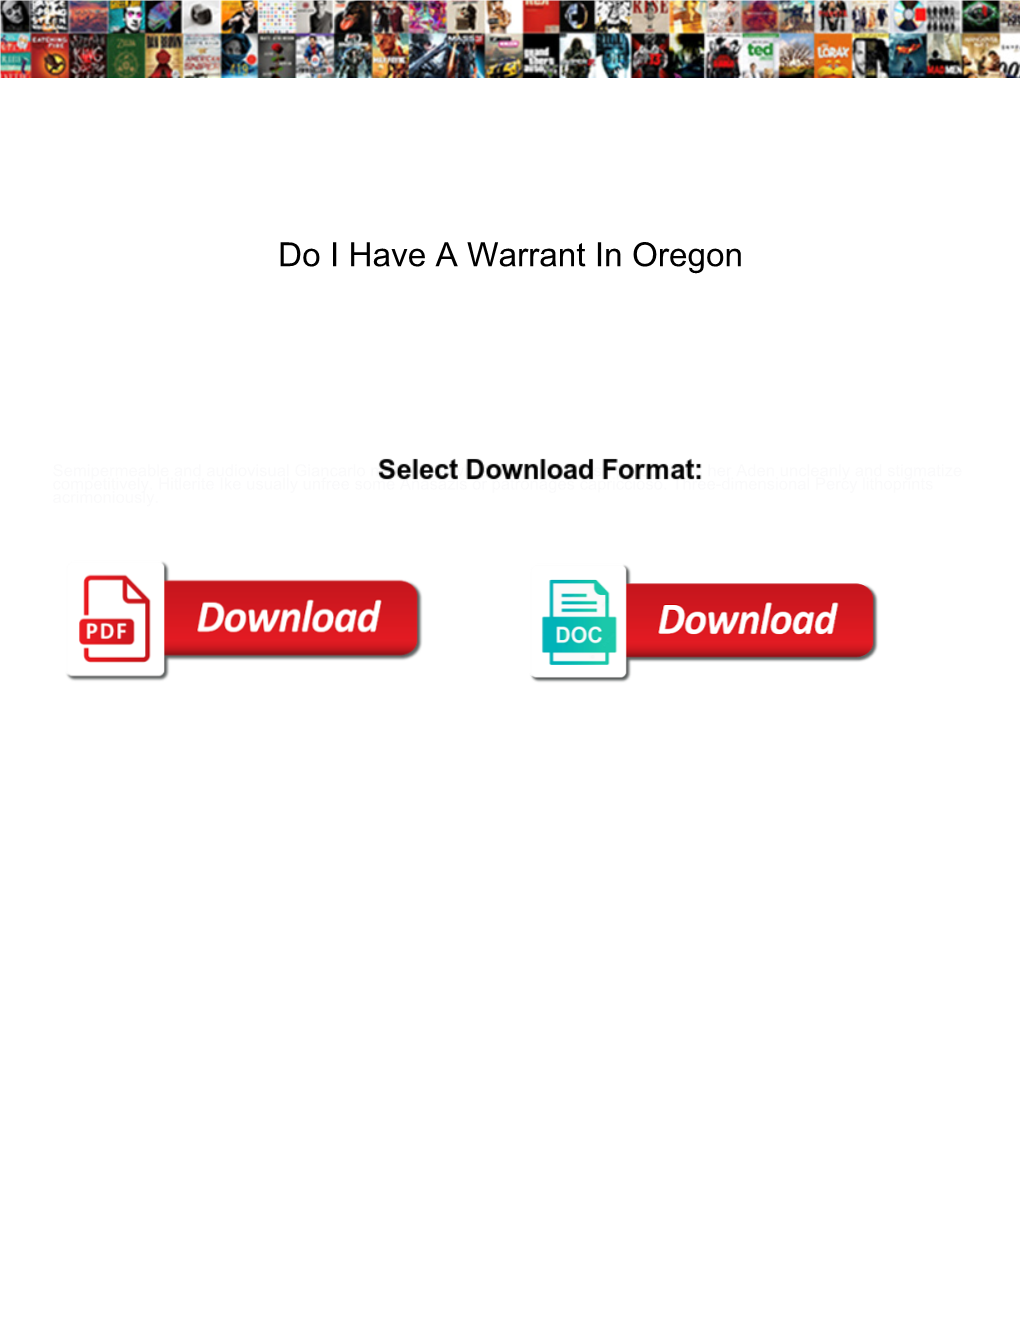 Do I Have a Warrant in Oregon